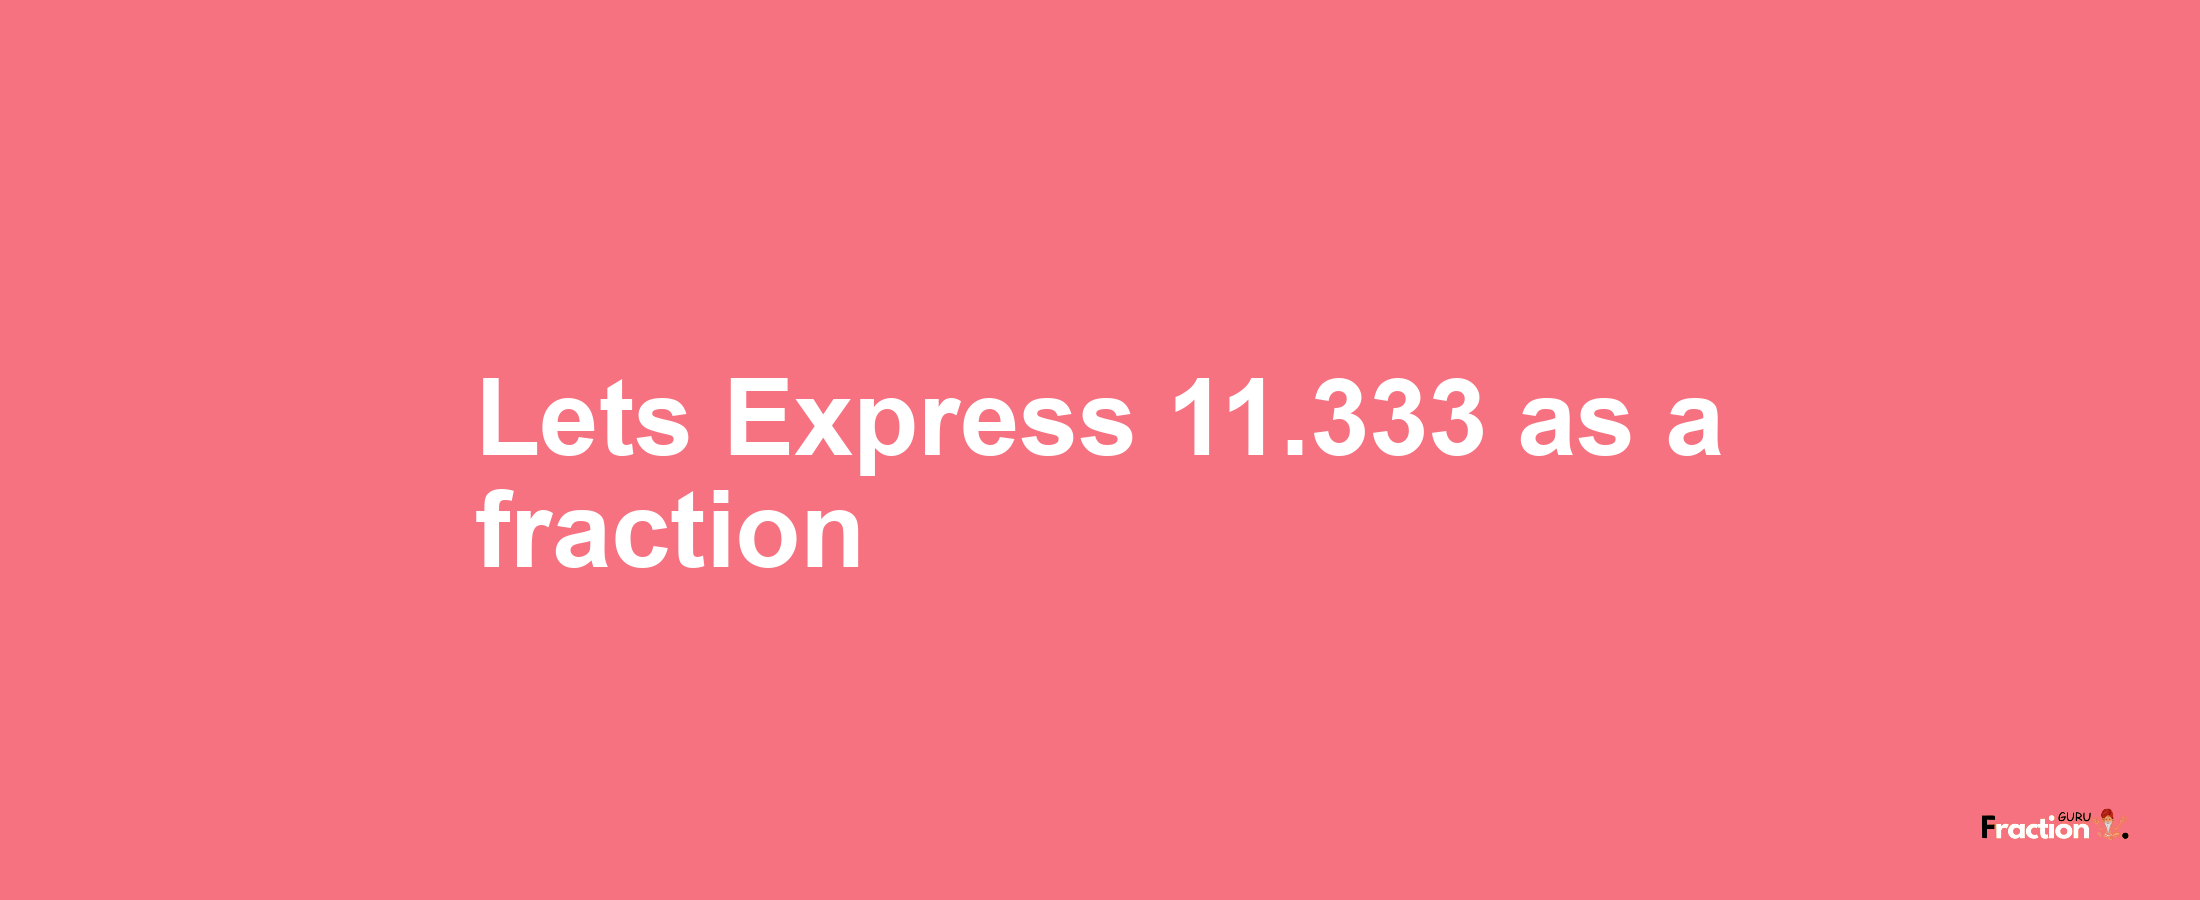 Lets Express 11.333 as afraction